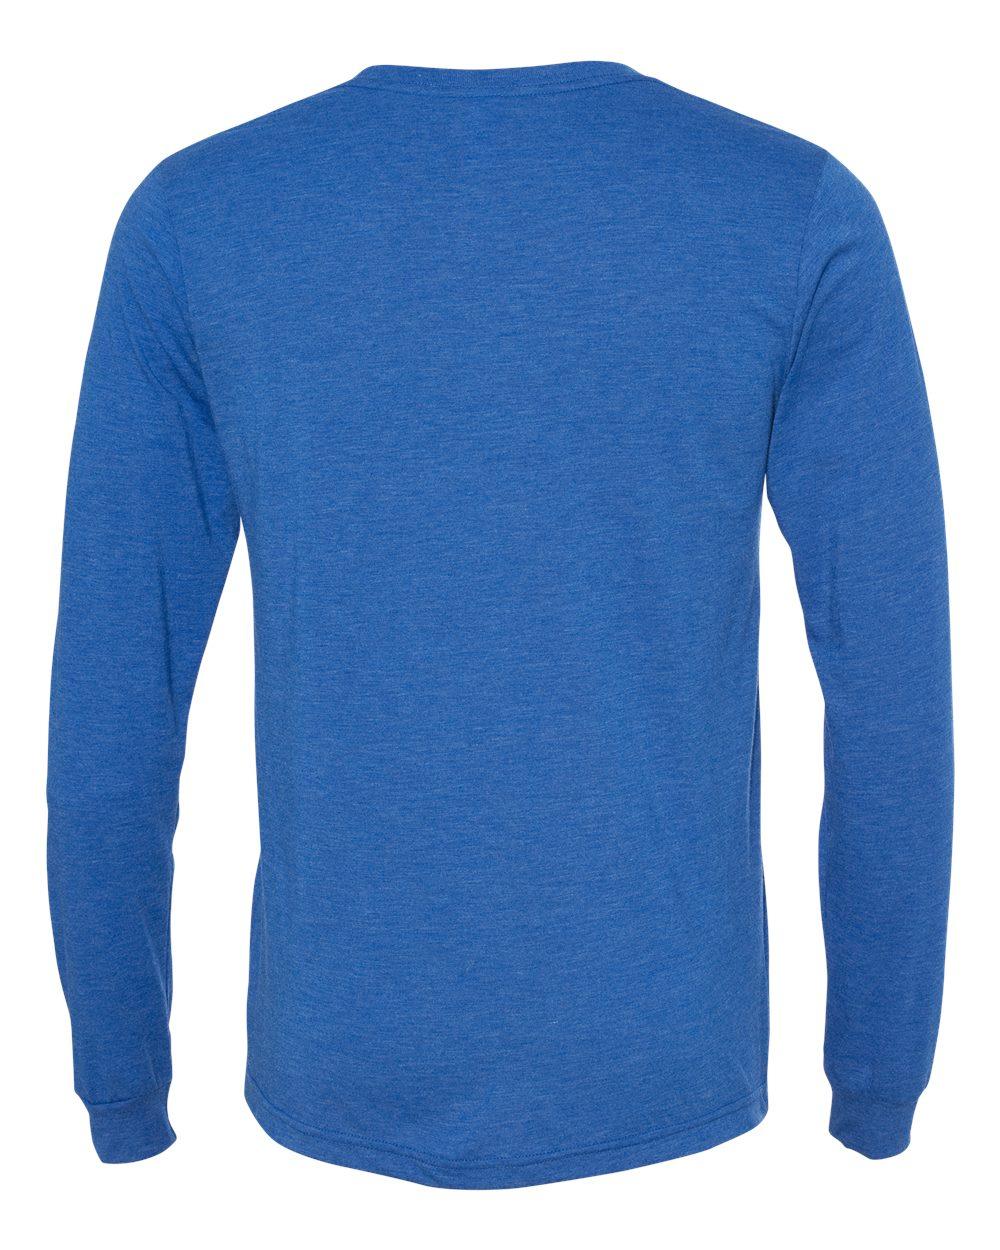 100% Combed and Ringspun Cotton LONG SLEEVE True